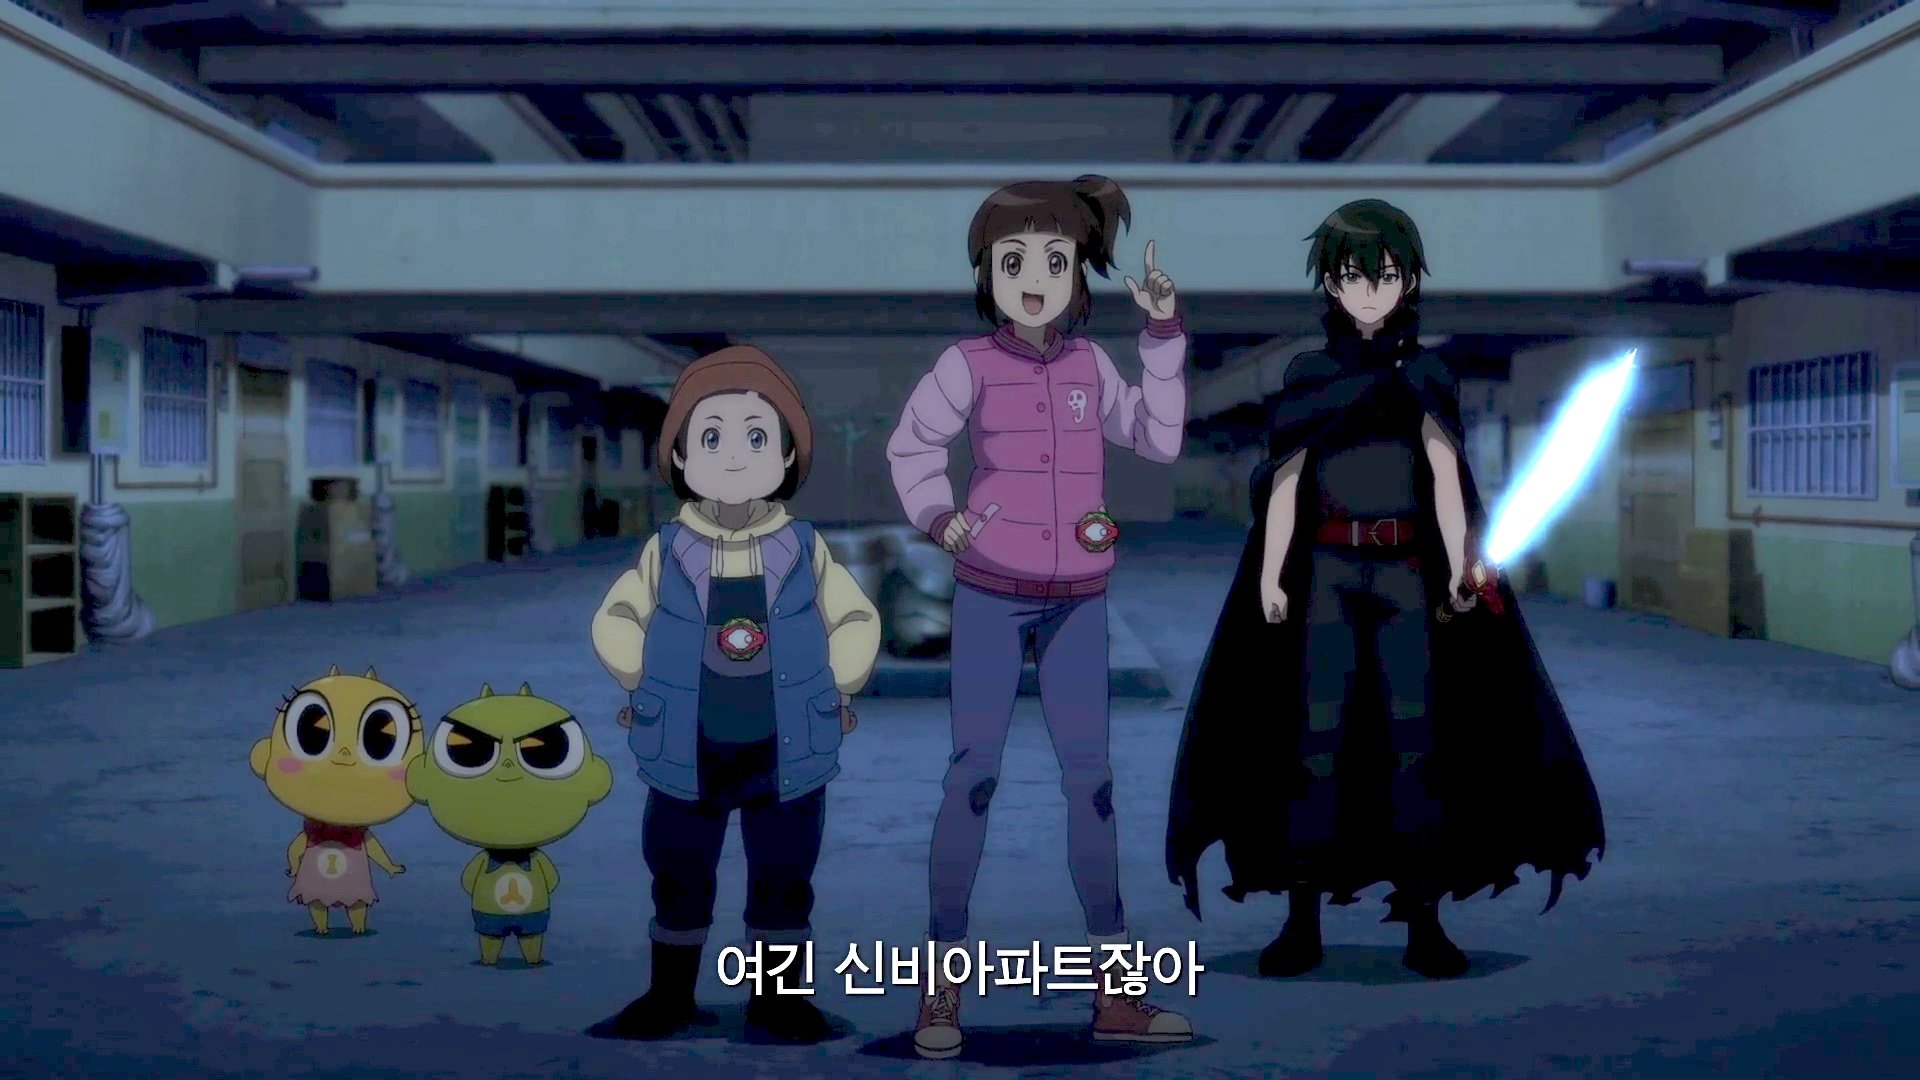 Video] Main Trailer Released for the Korean Animated Movie The